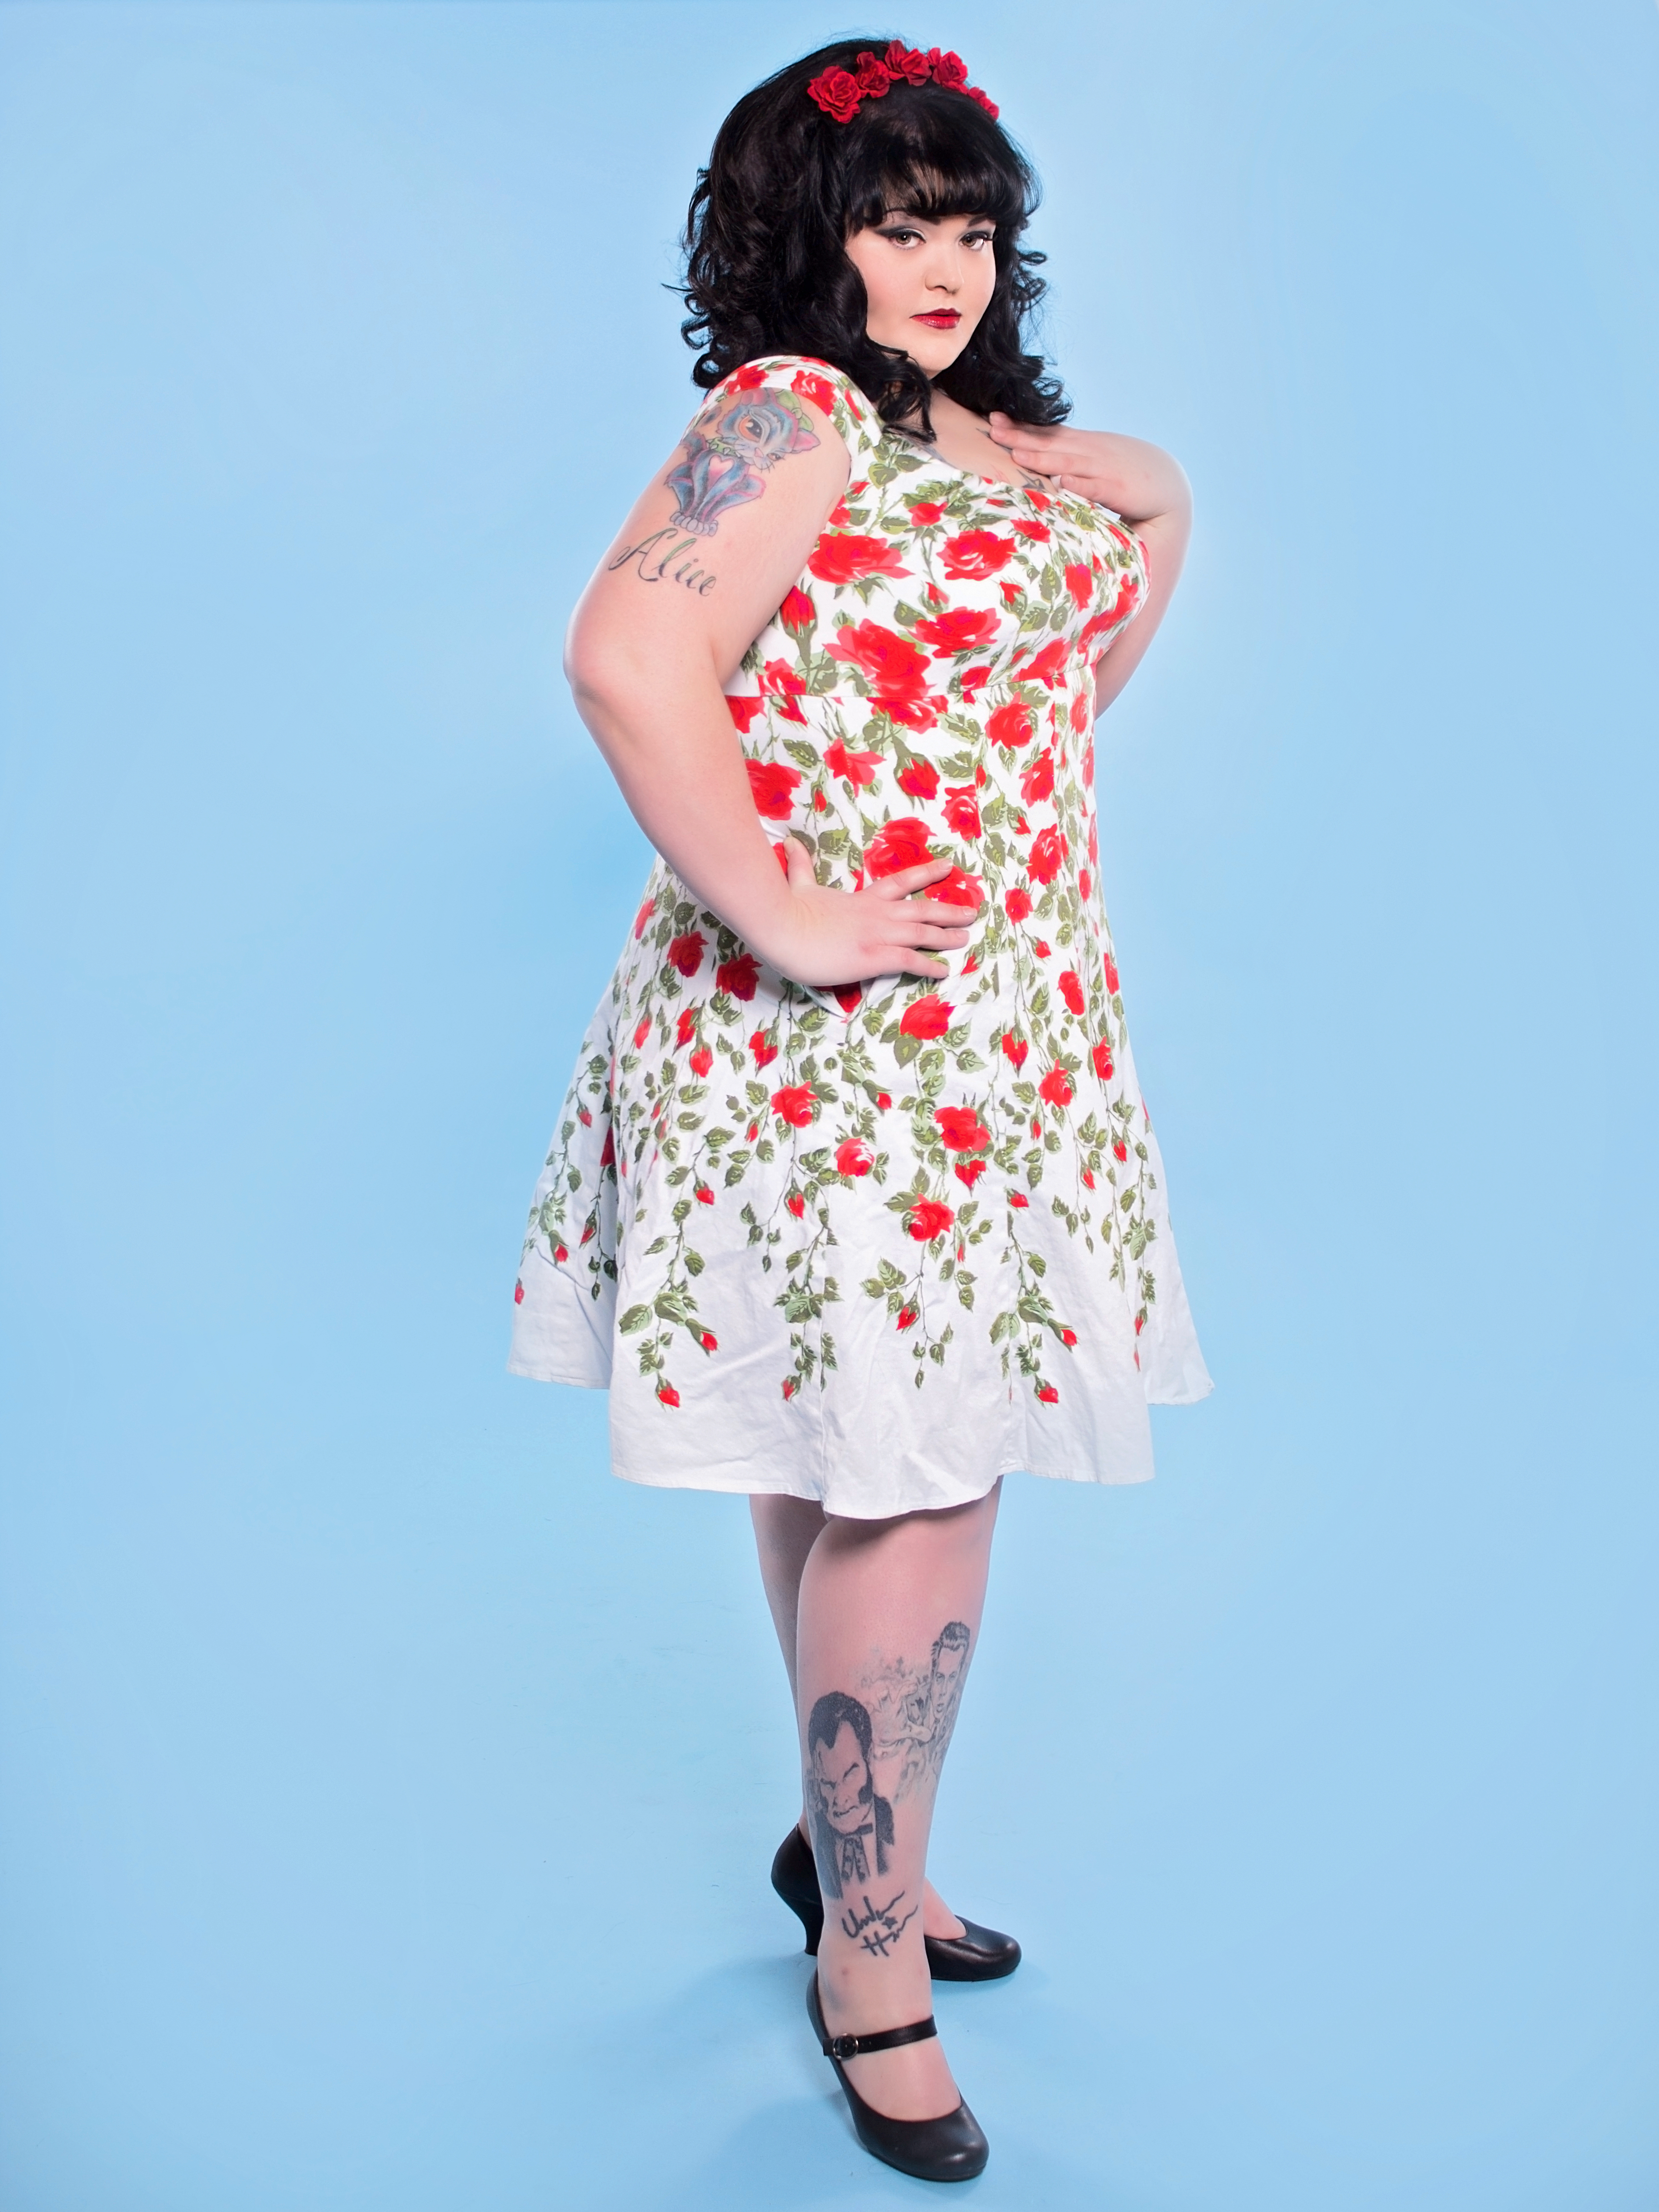 Sudzy Nixon promotes body positivity in her Portsmouth Pin-Up shop. Photo: Laura Dark Photography  Hair: Cat Monster Make-up: On-Call Artistry